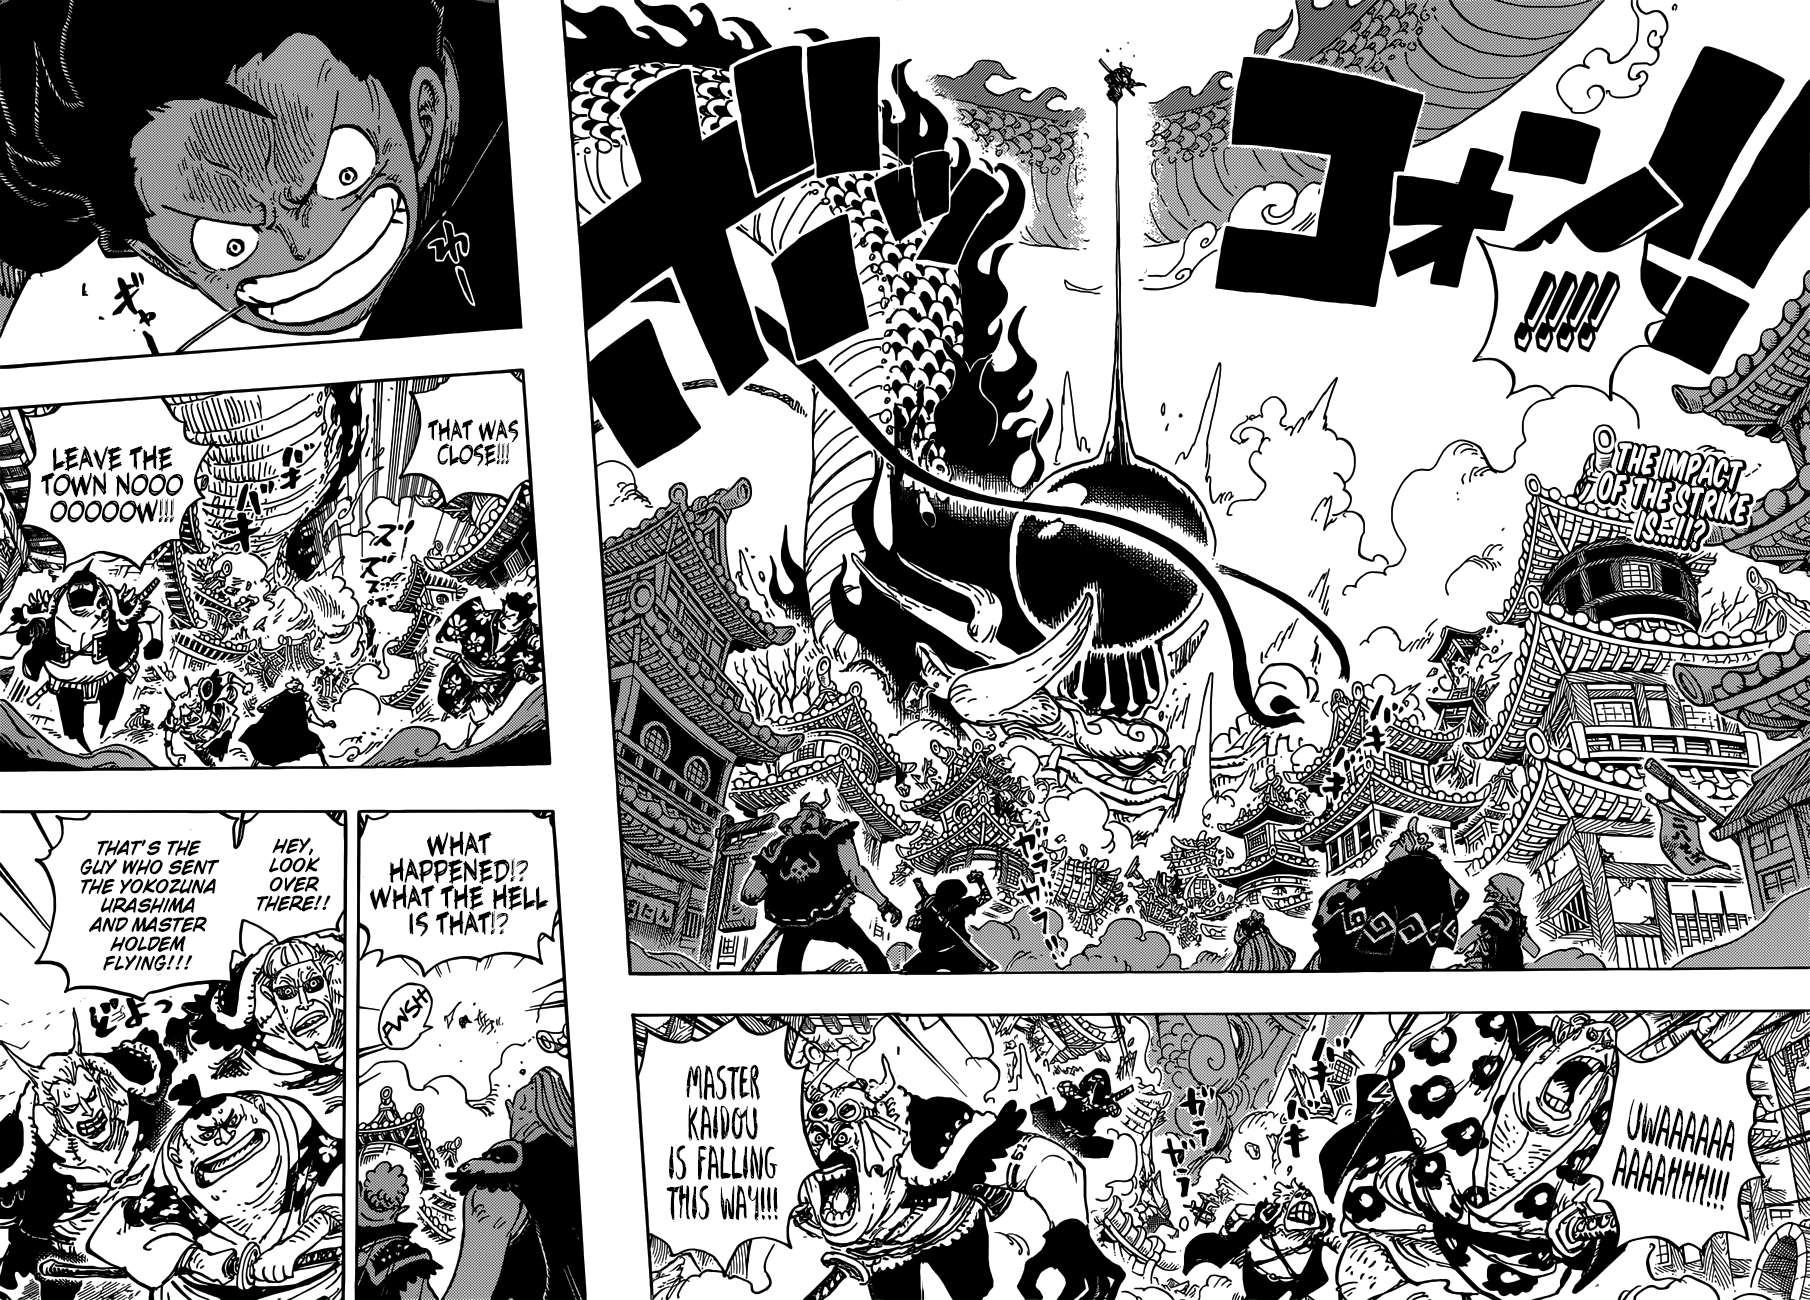 One Piece, Chapter 923 - Emperor Kaidou VS. Luffy image 03